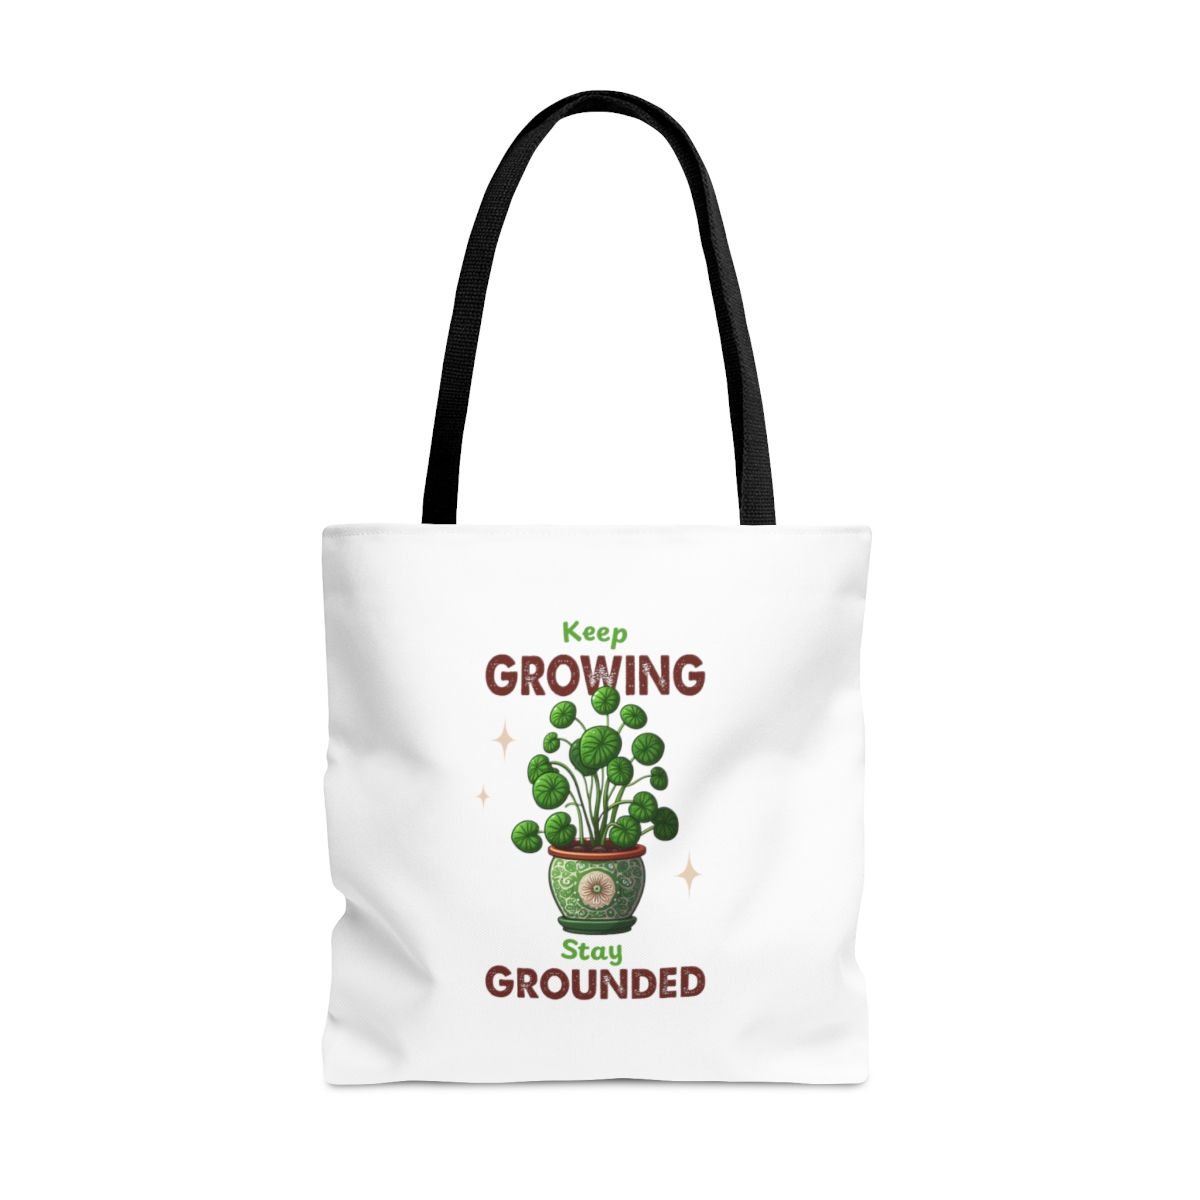 Tote Bag - "Keep Growing & Stay Grounded" product thumbnail image